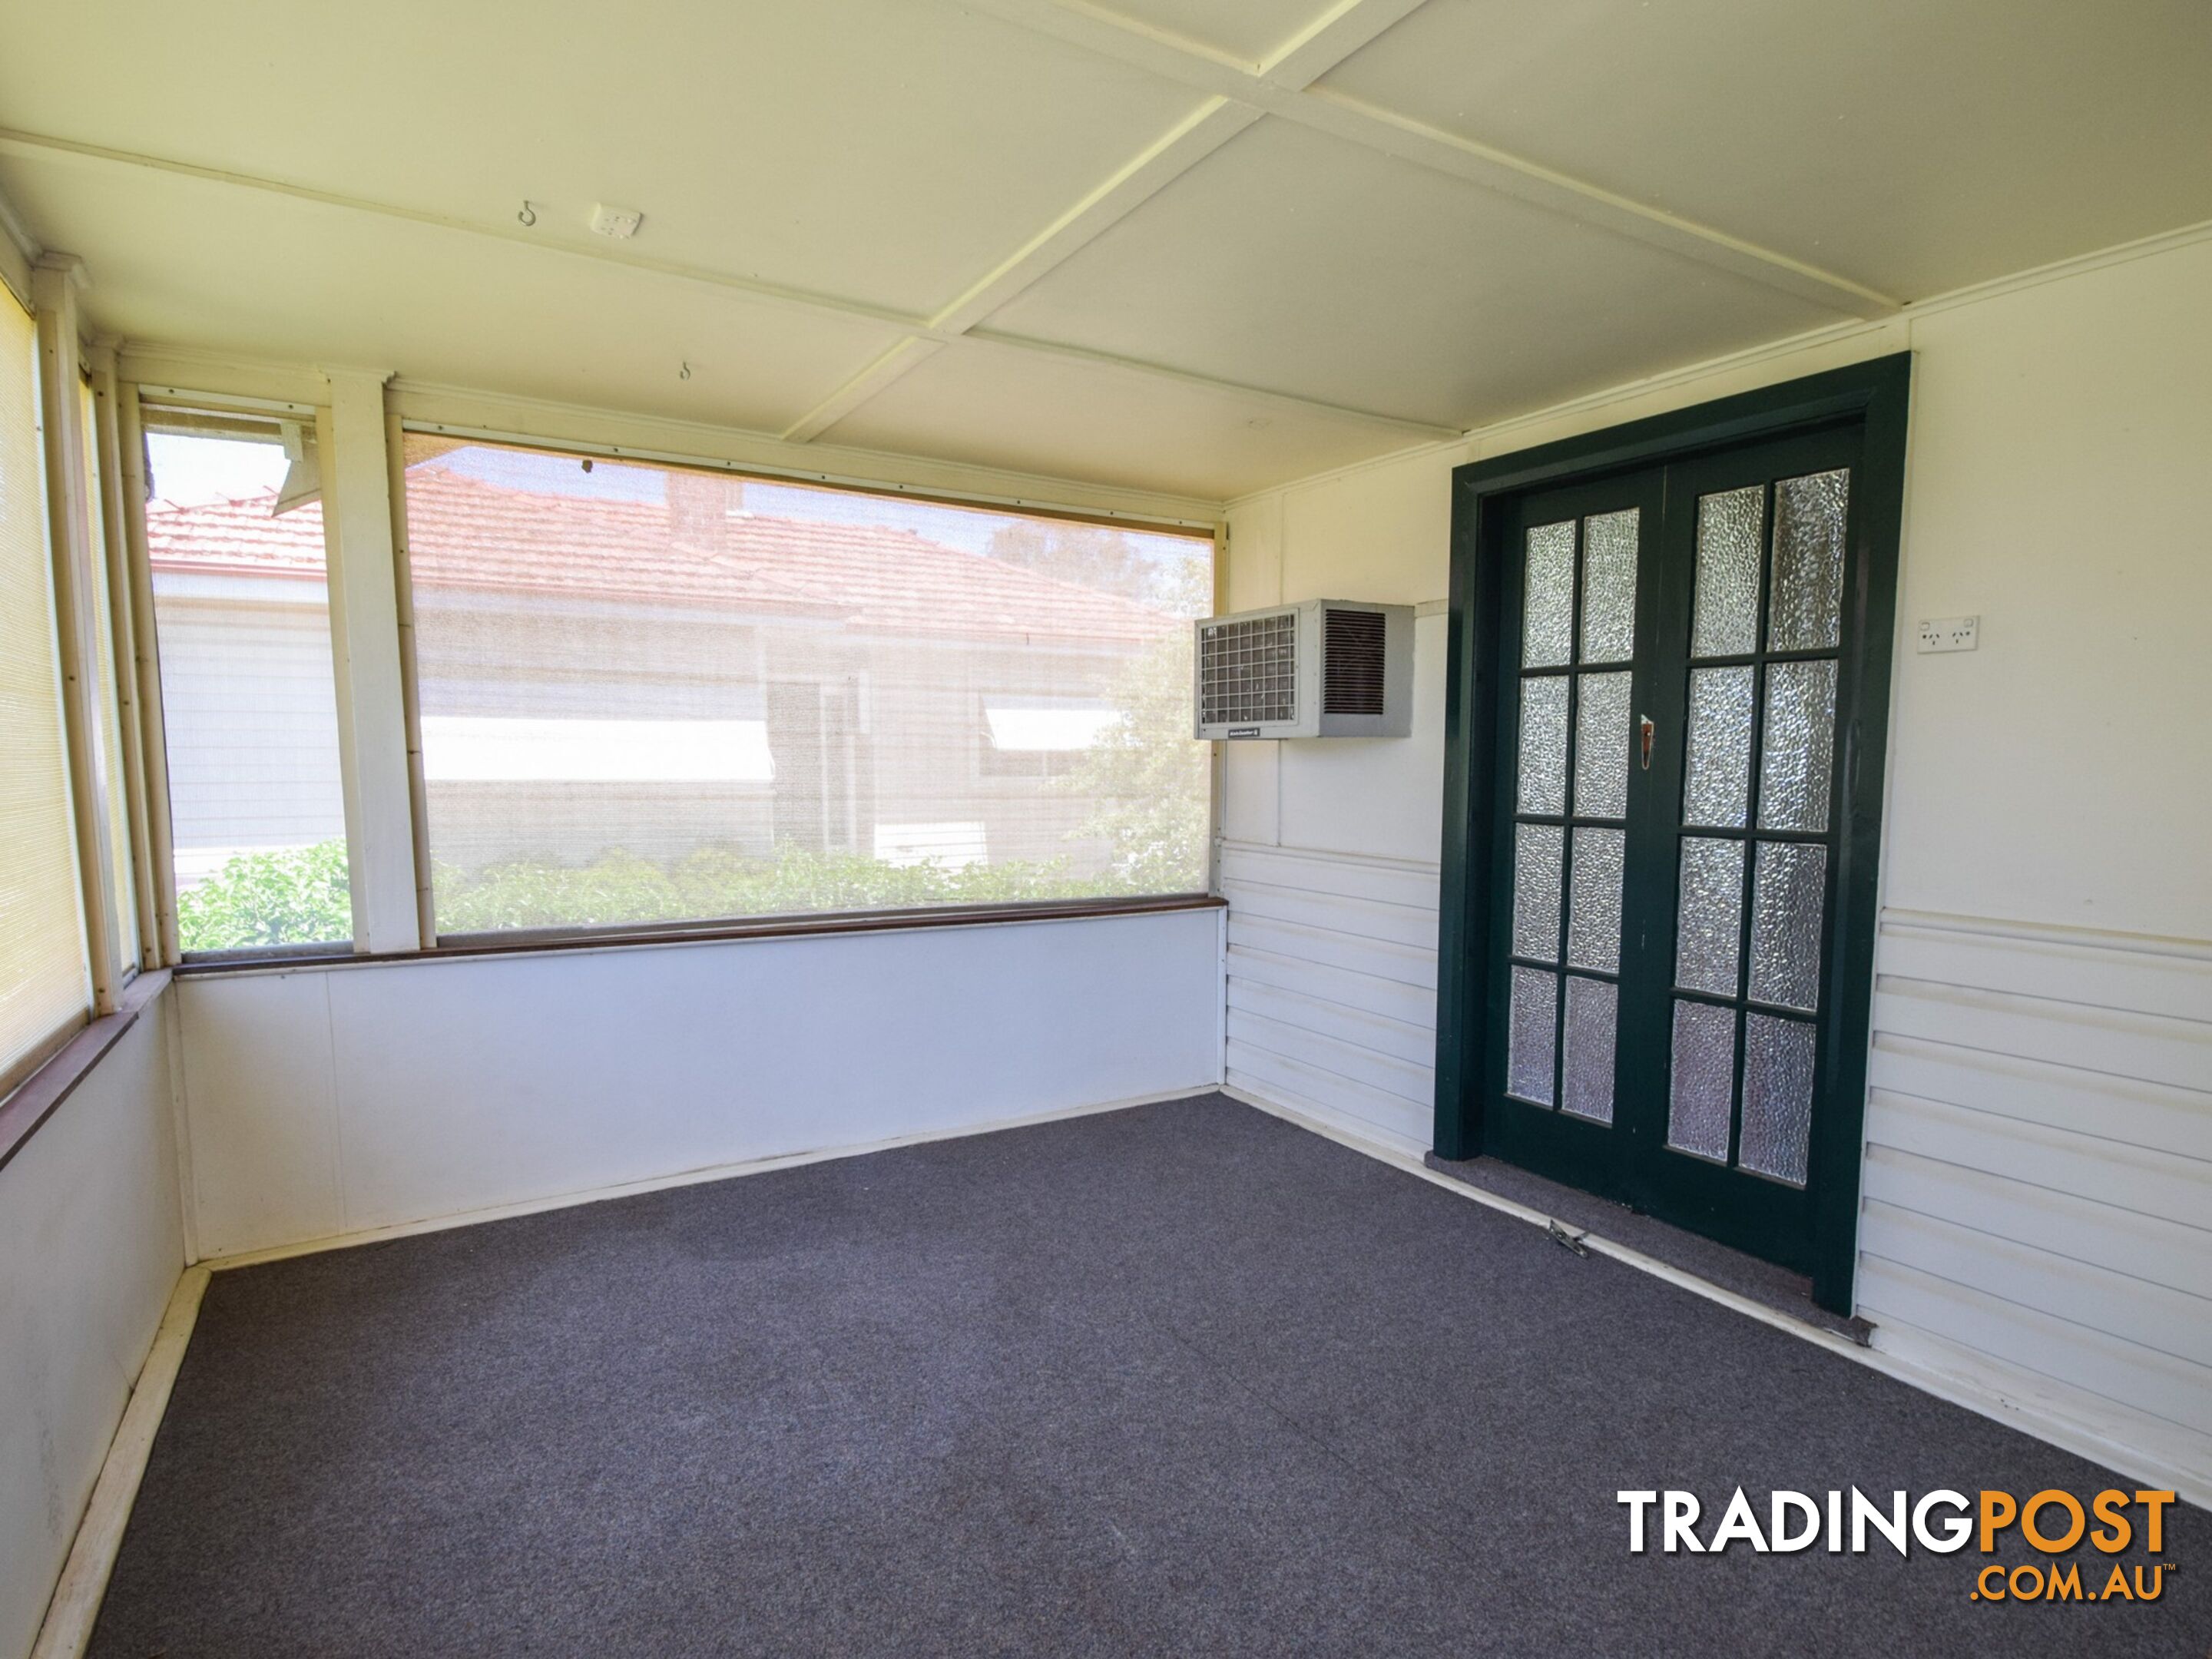 10 Brock Street YOUNG NSW 2594